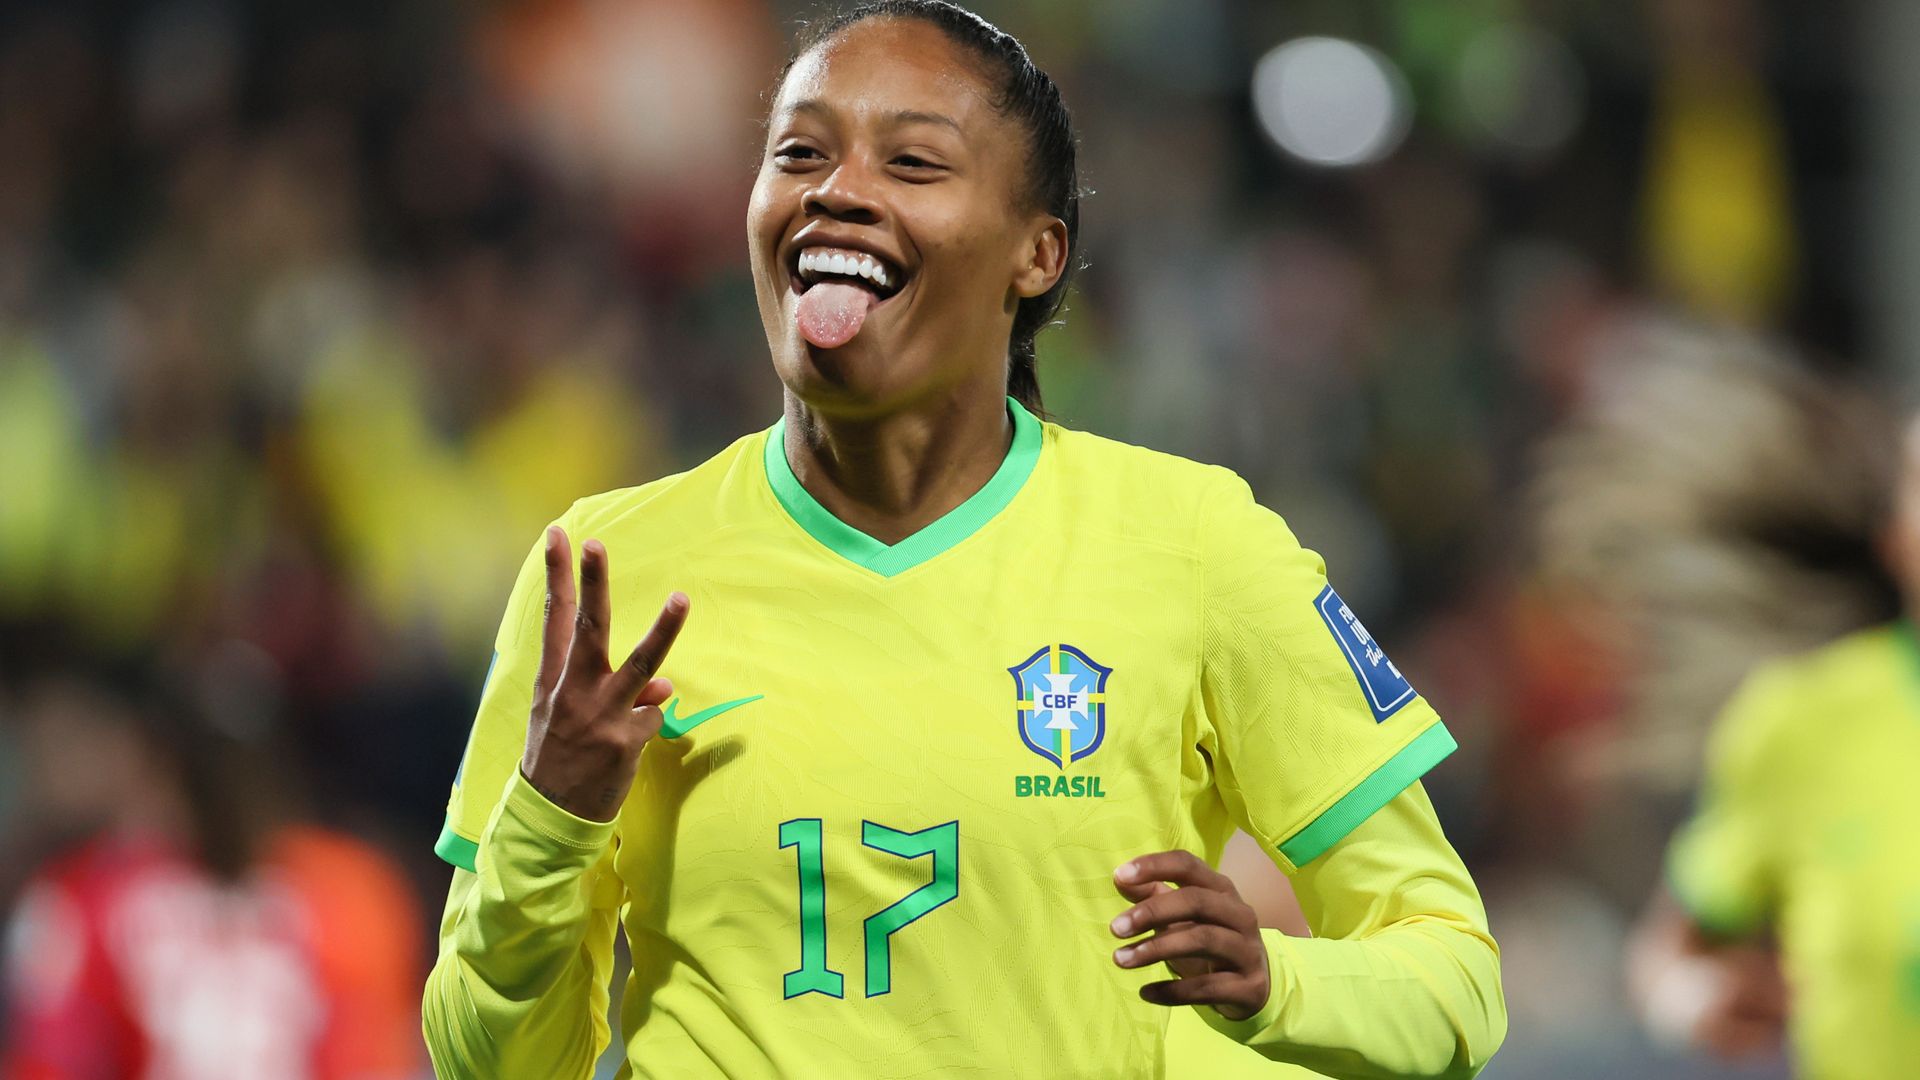 Borges nets hat-trick as Brazil show flashes of samba style to beat Panama